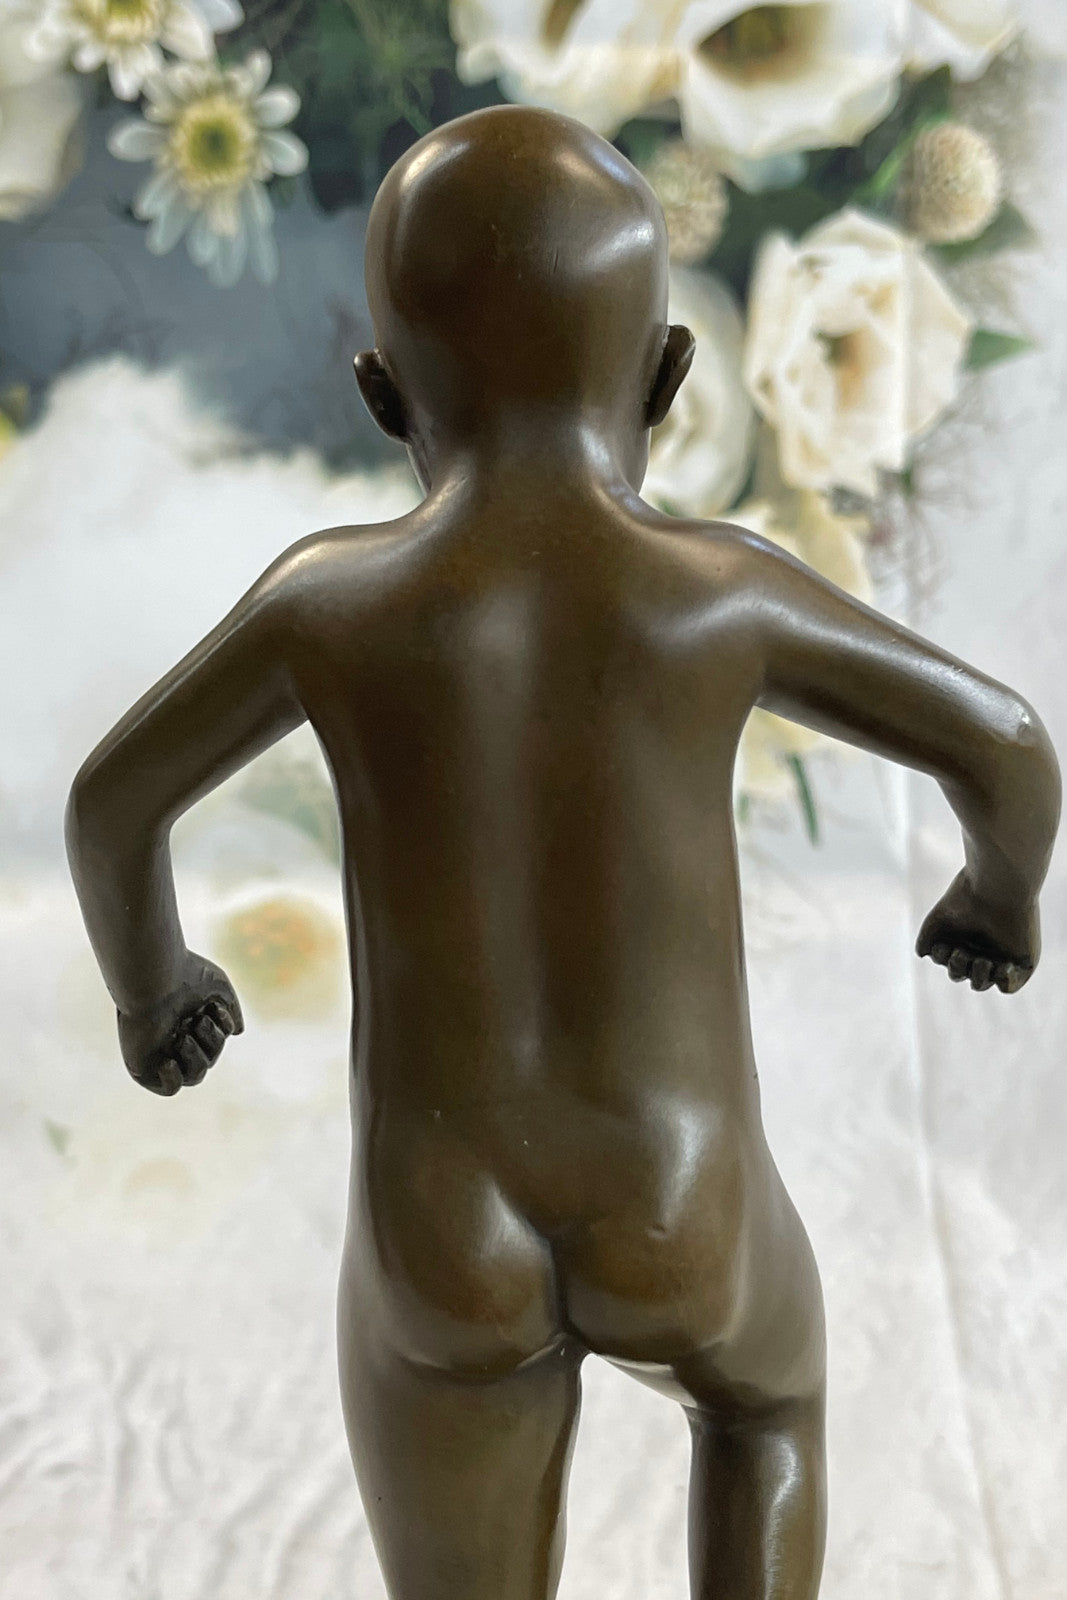 Hot Cast Baby Crying by Miguel Lopez Known As Milo Bronze sculpture Statue